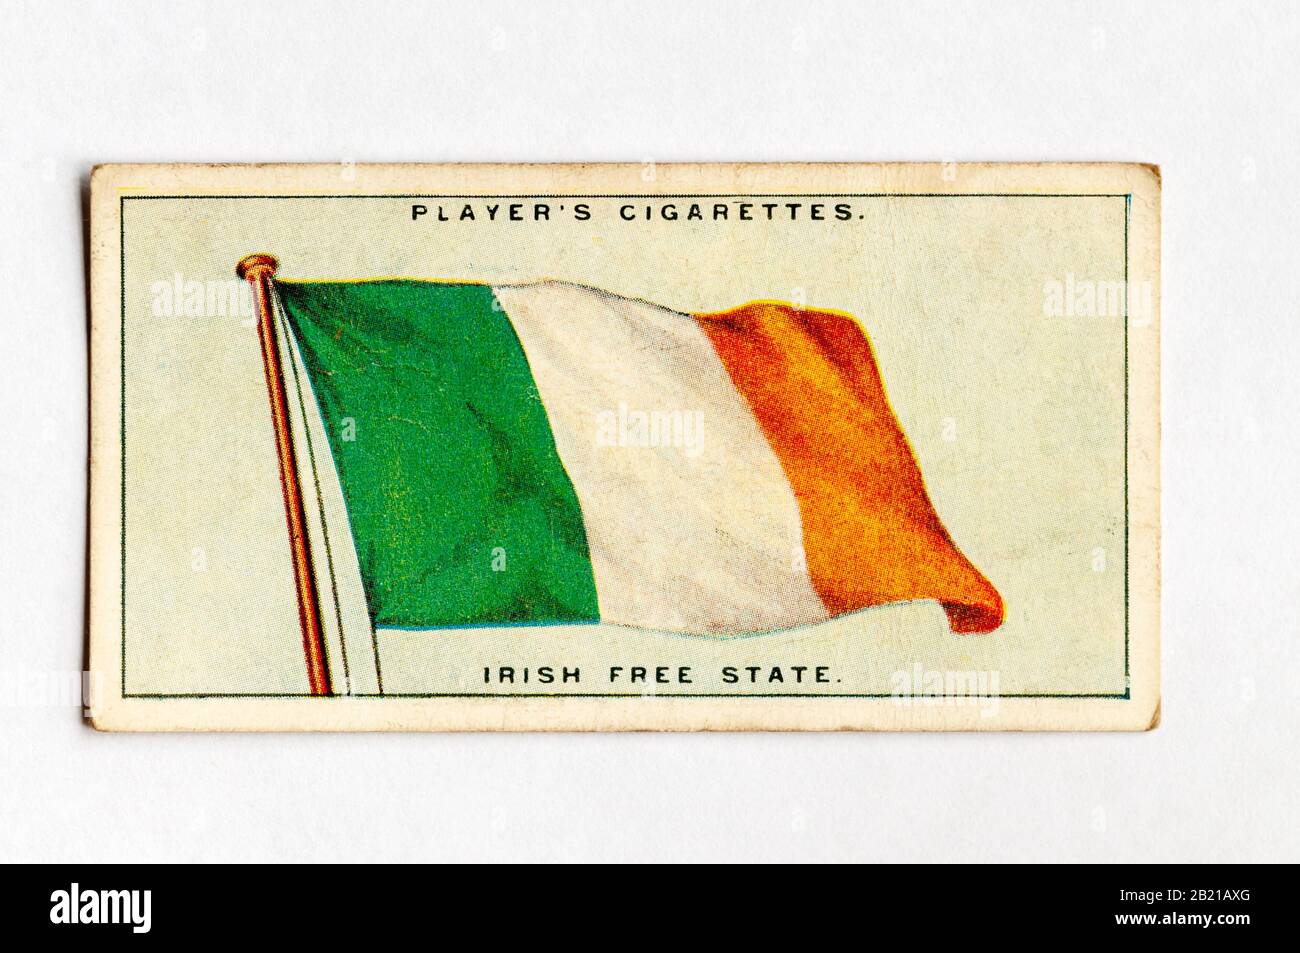 Player's cigarette card in Flags of the League of Nations series shows flag of the Irish Free State.  Issued 1928. Stock Photo